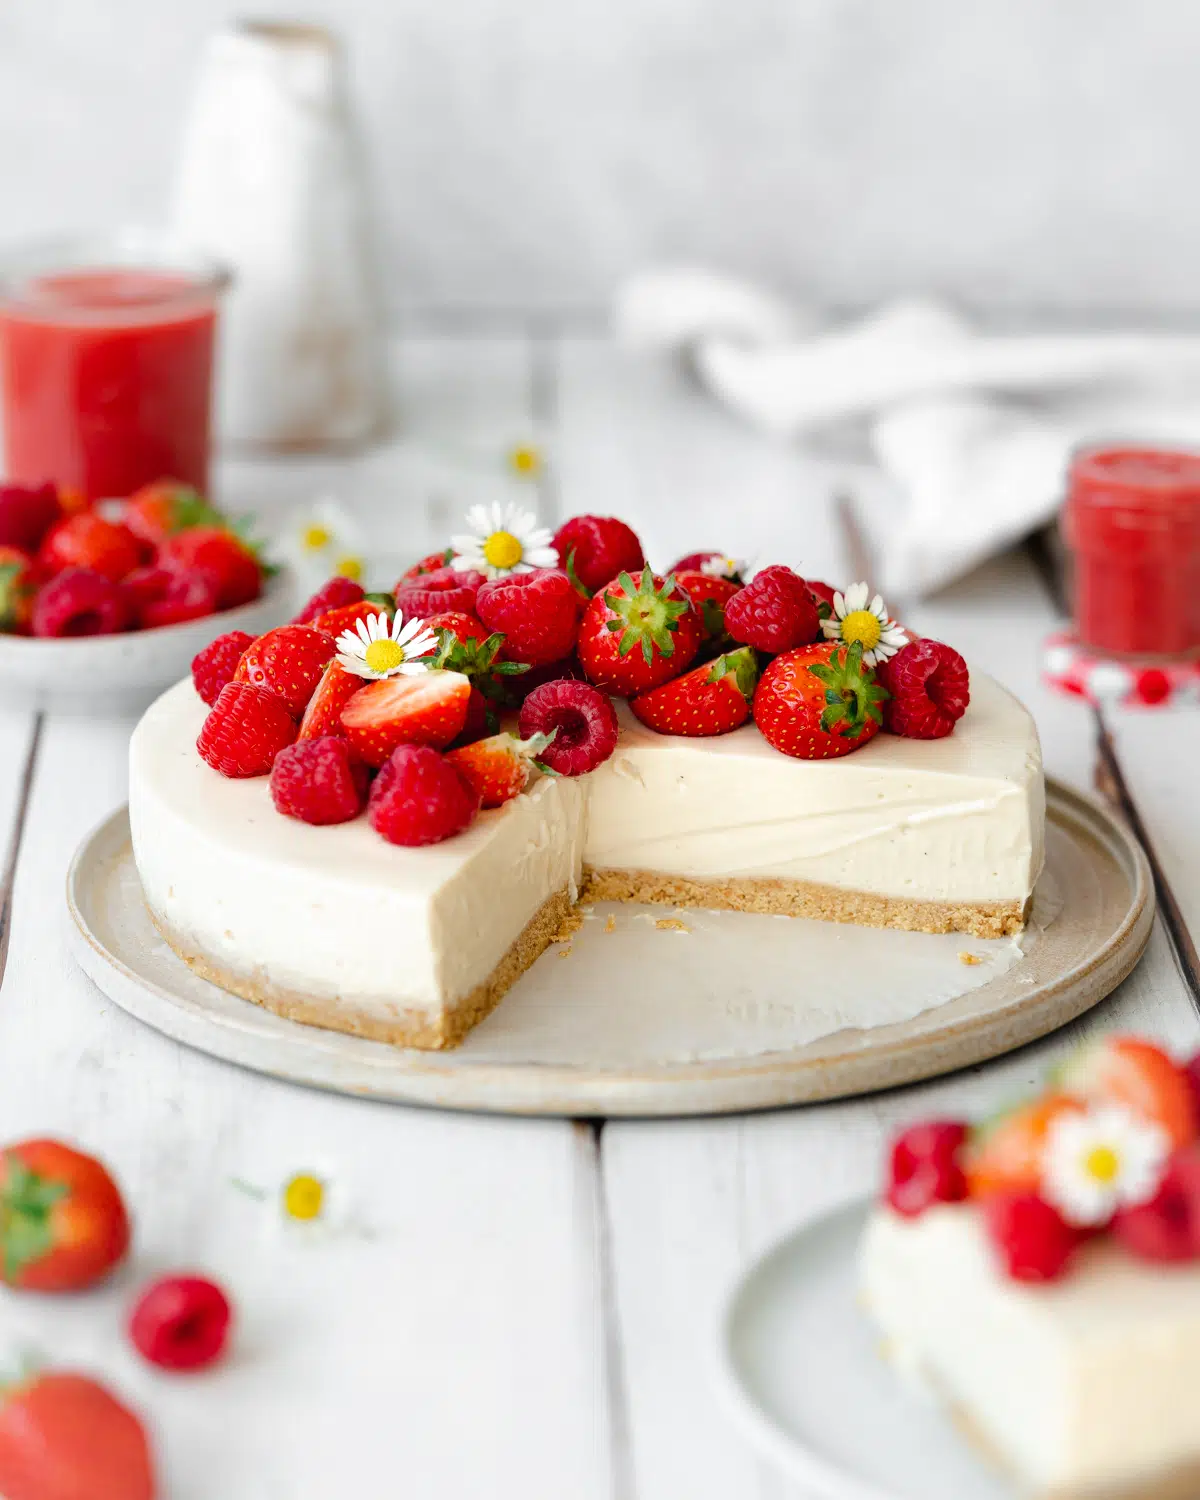 no bake cheesecake with fresh berries and flowers on top on a white wooden surface.